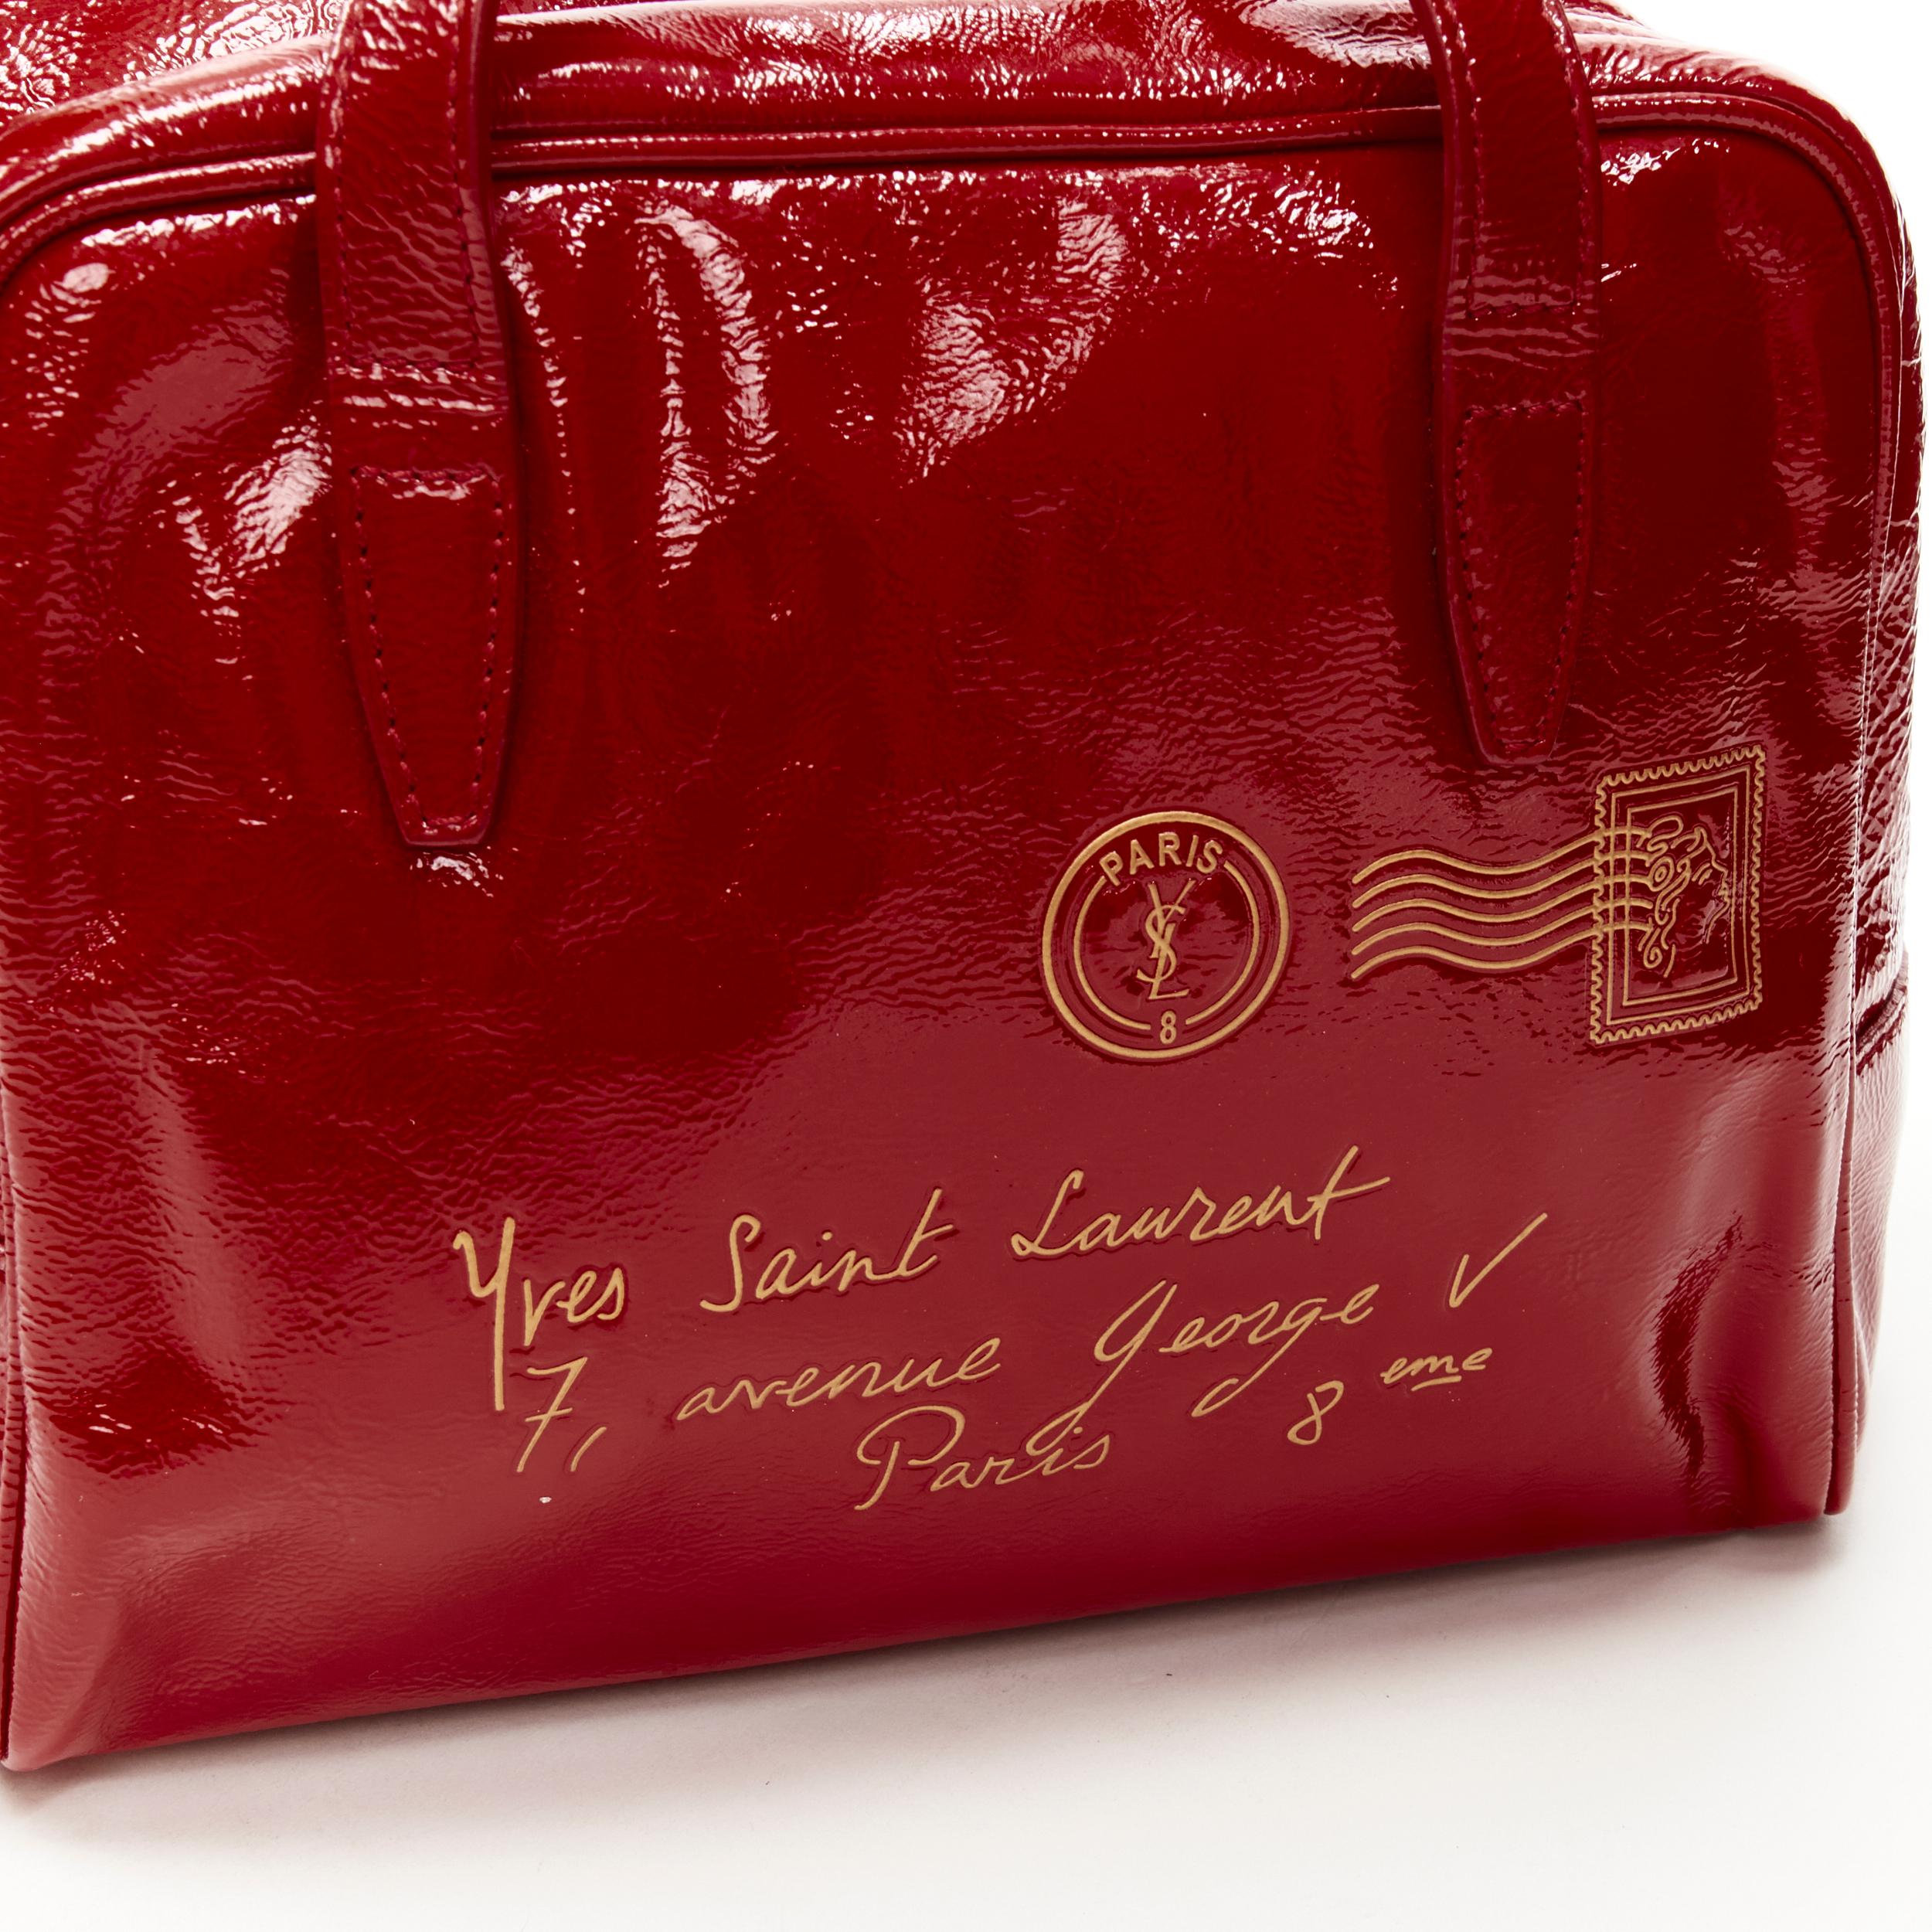 YVES SAINT LAURENT Y-Mail red crinkled patent leather gold letter print bag 1